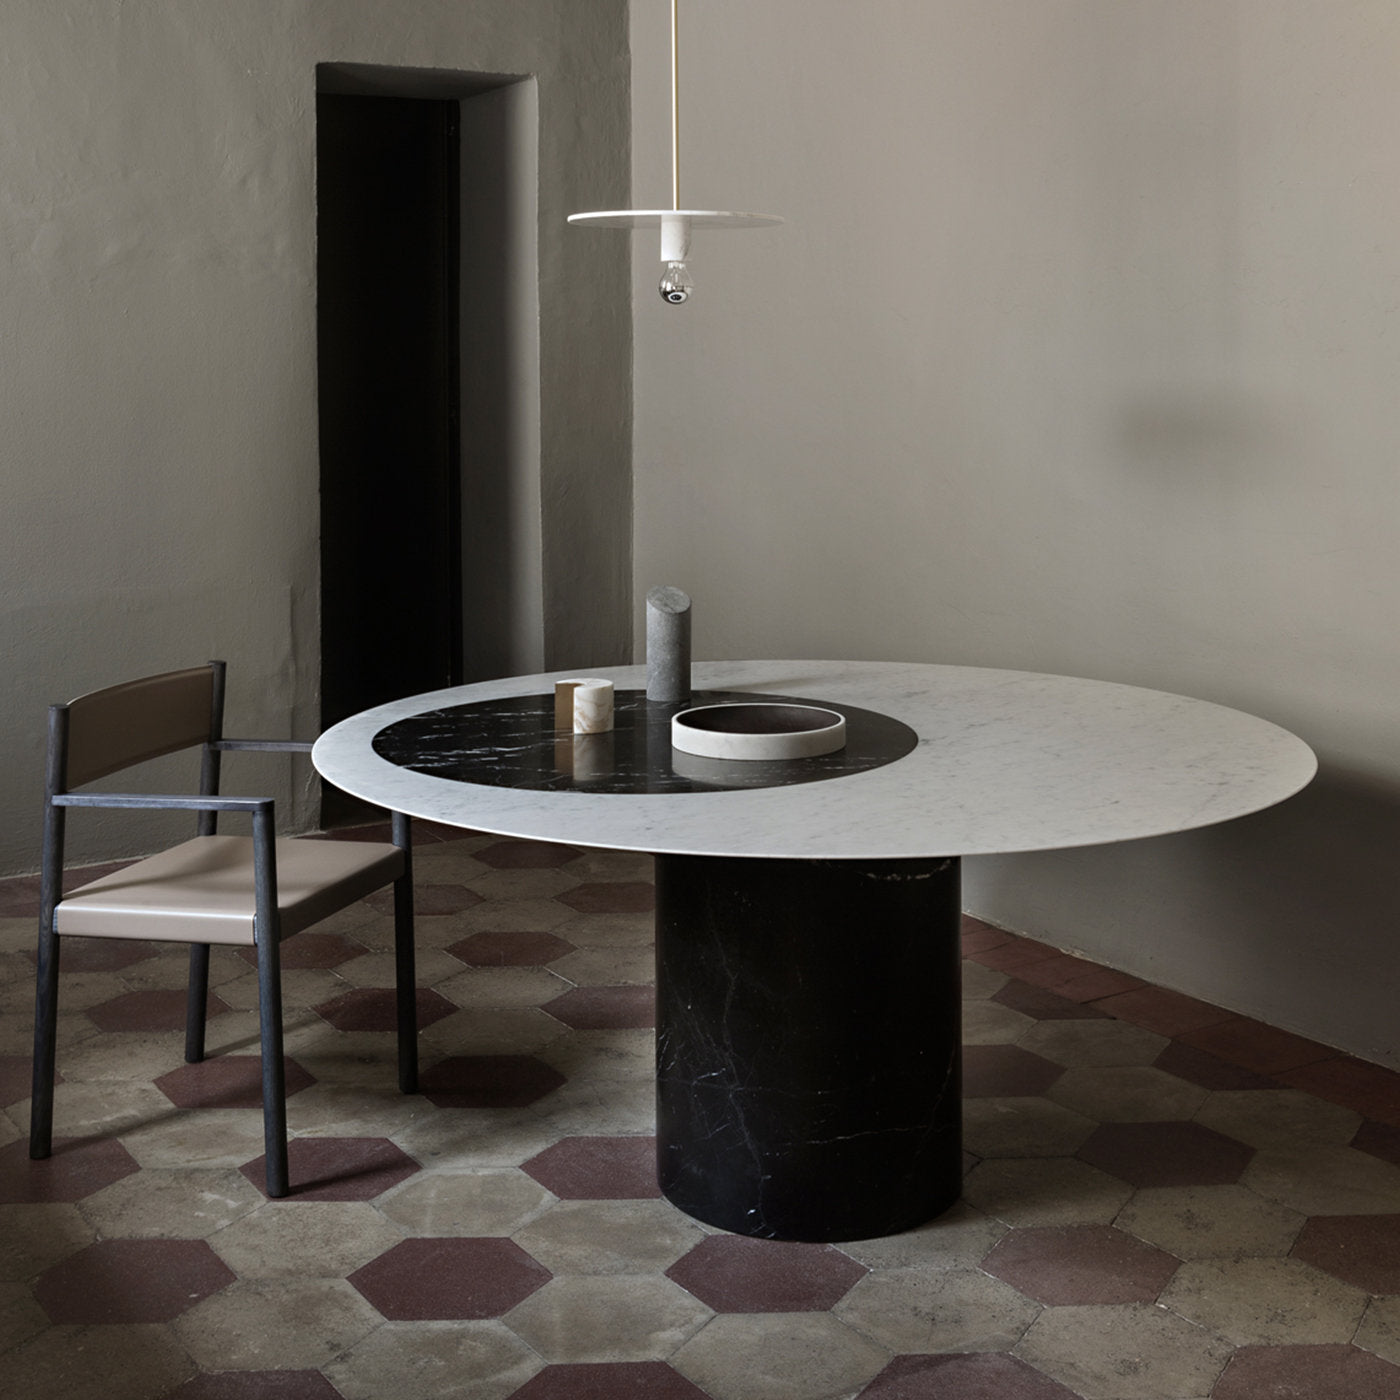 Proiezioni Round Black and White Marble Dining Table #1 by Elisa Ossino - Alternative view 1